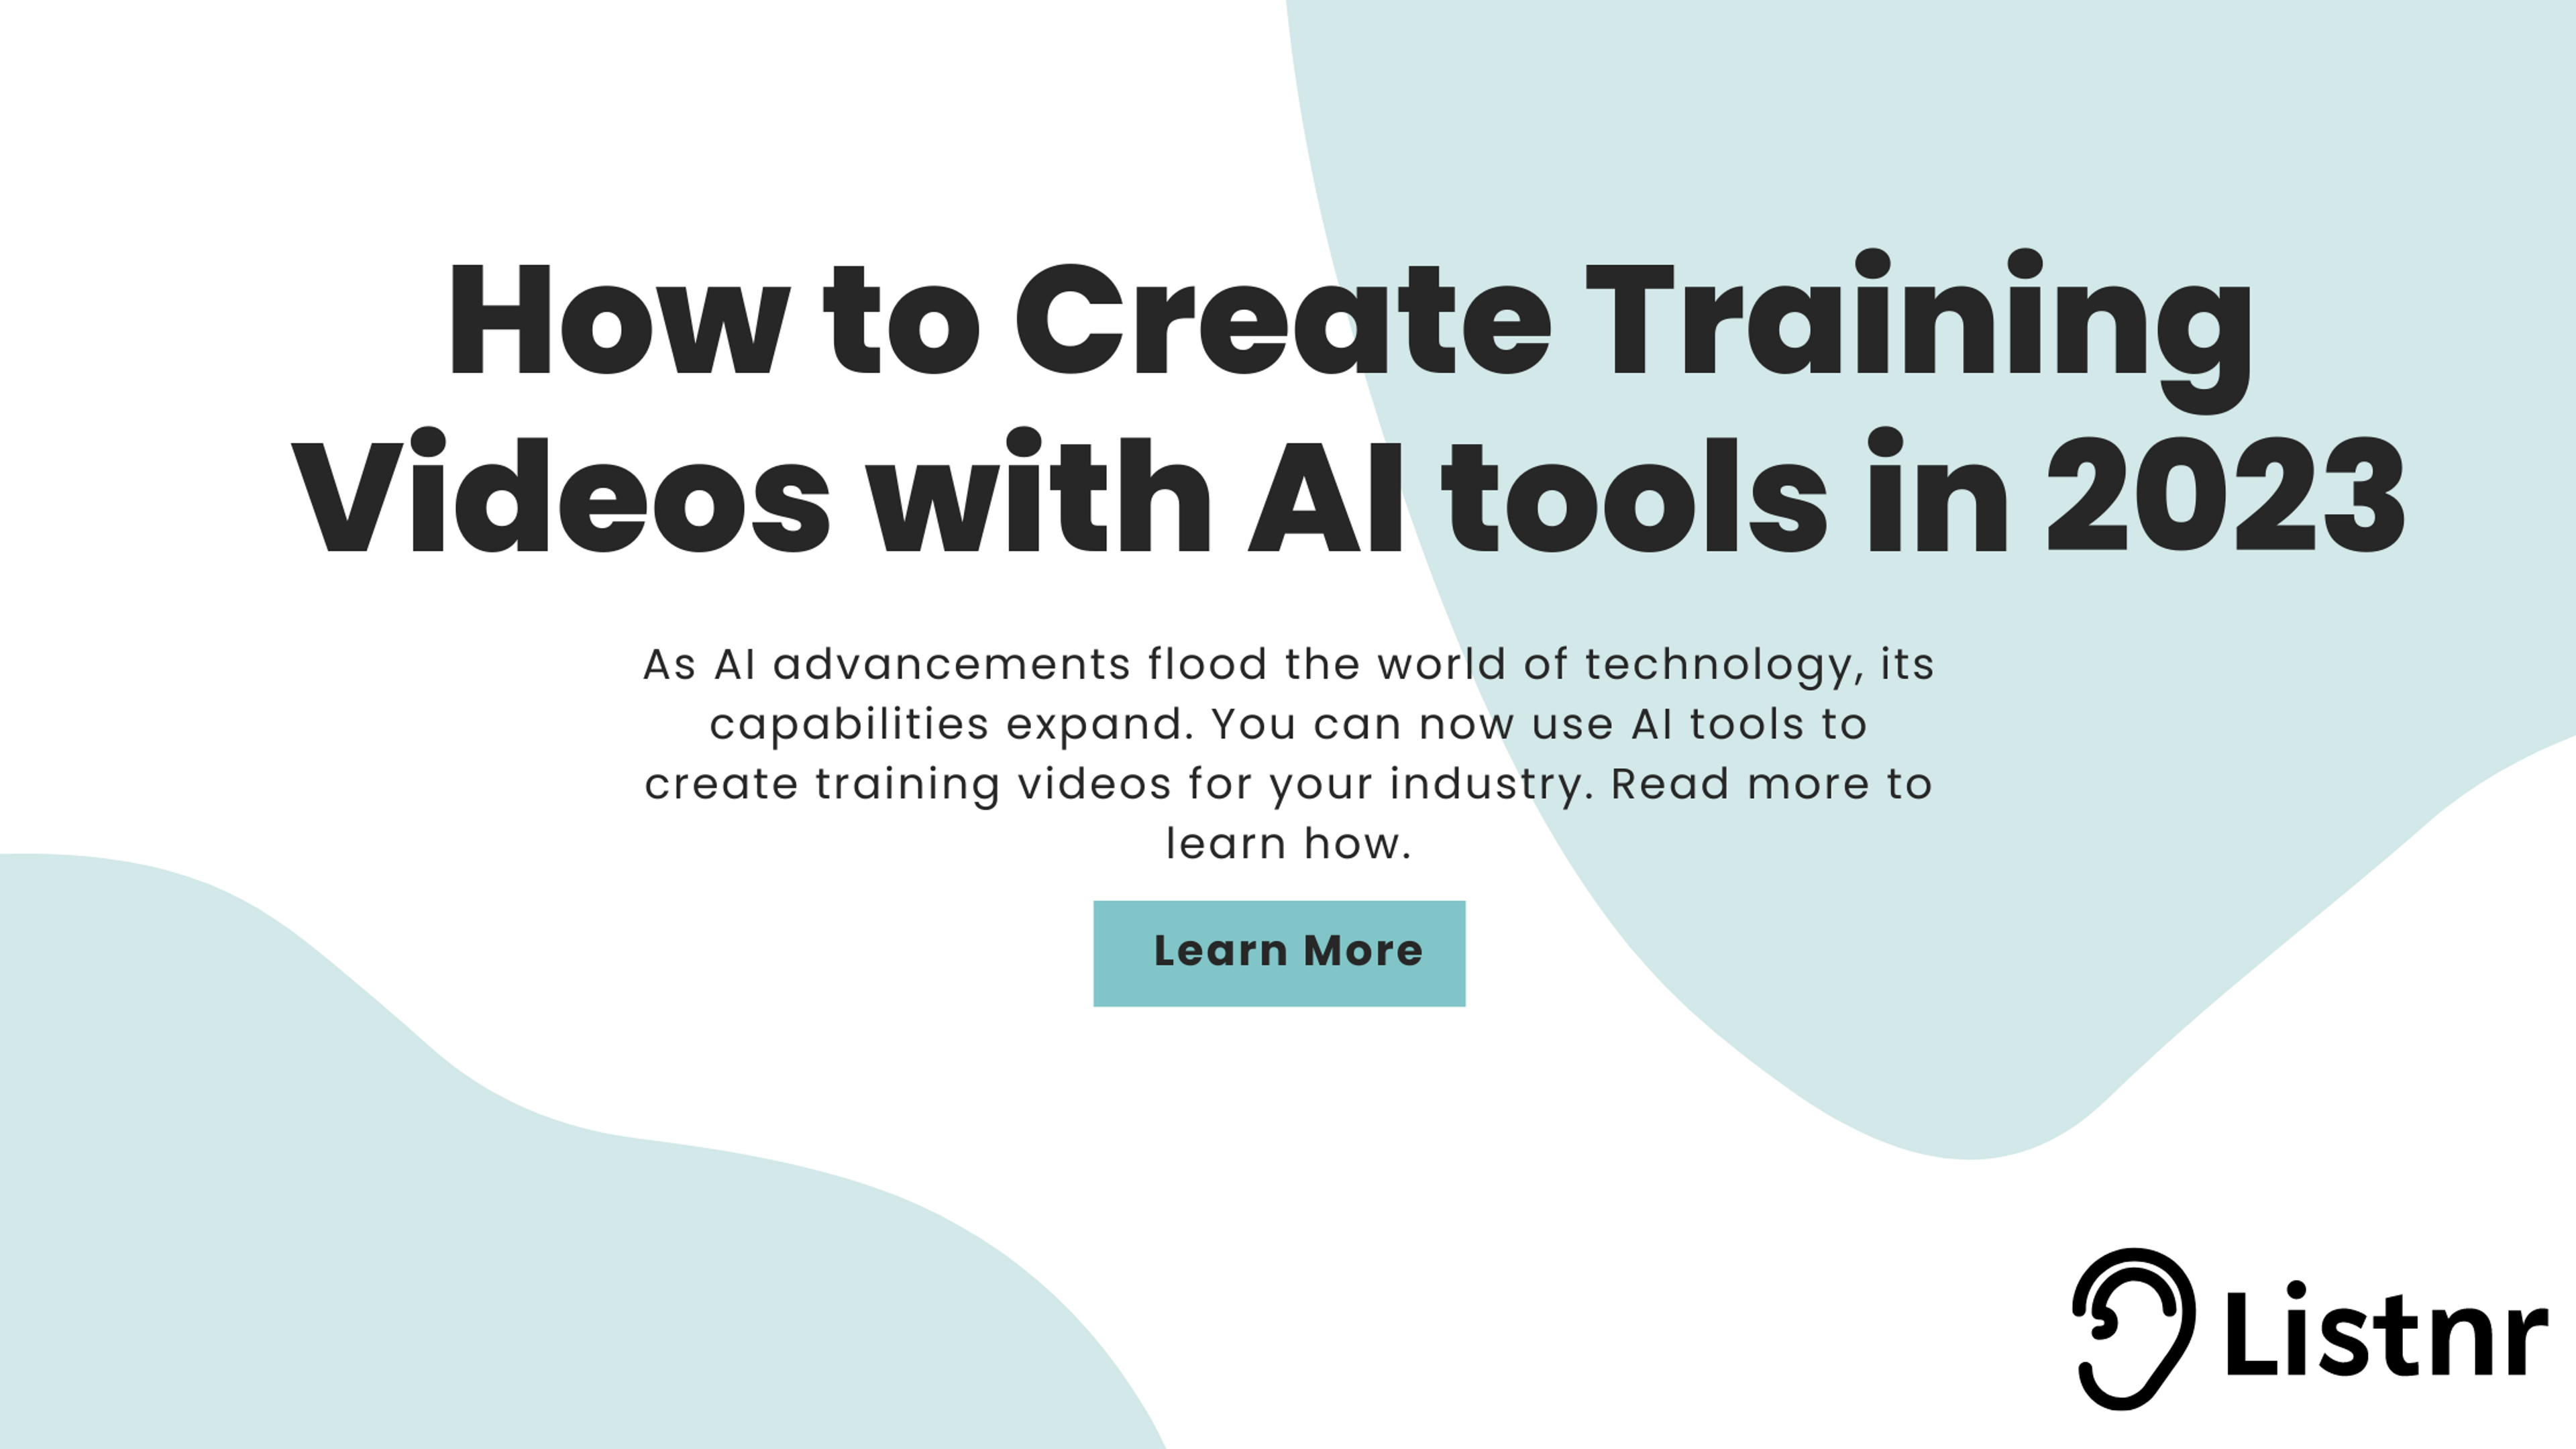 How to Create Training Videos with AI tools in 2023